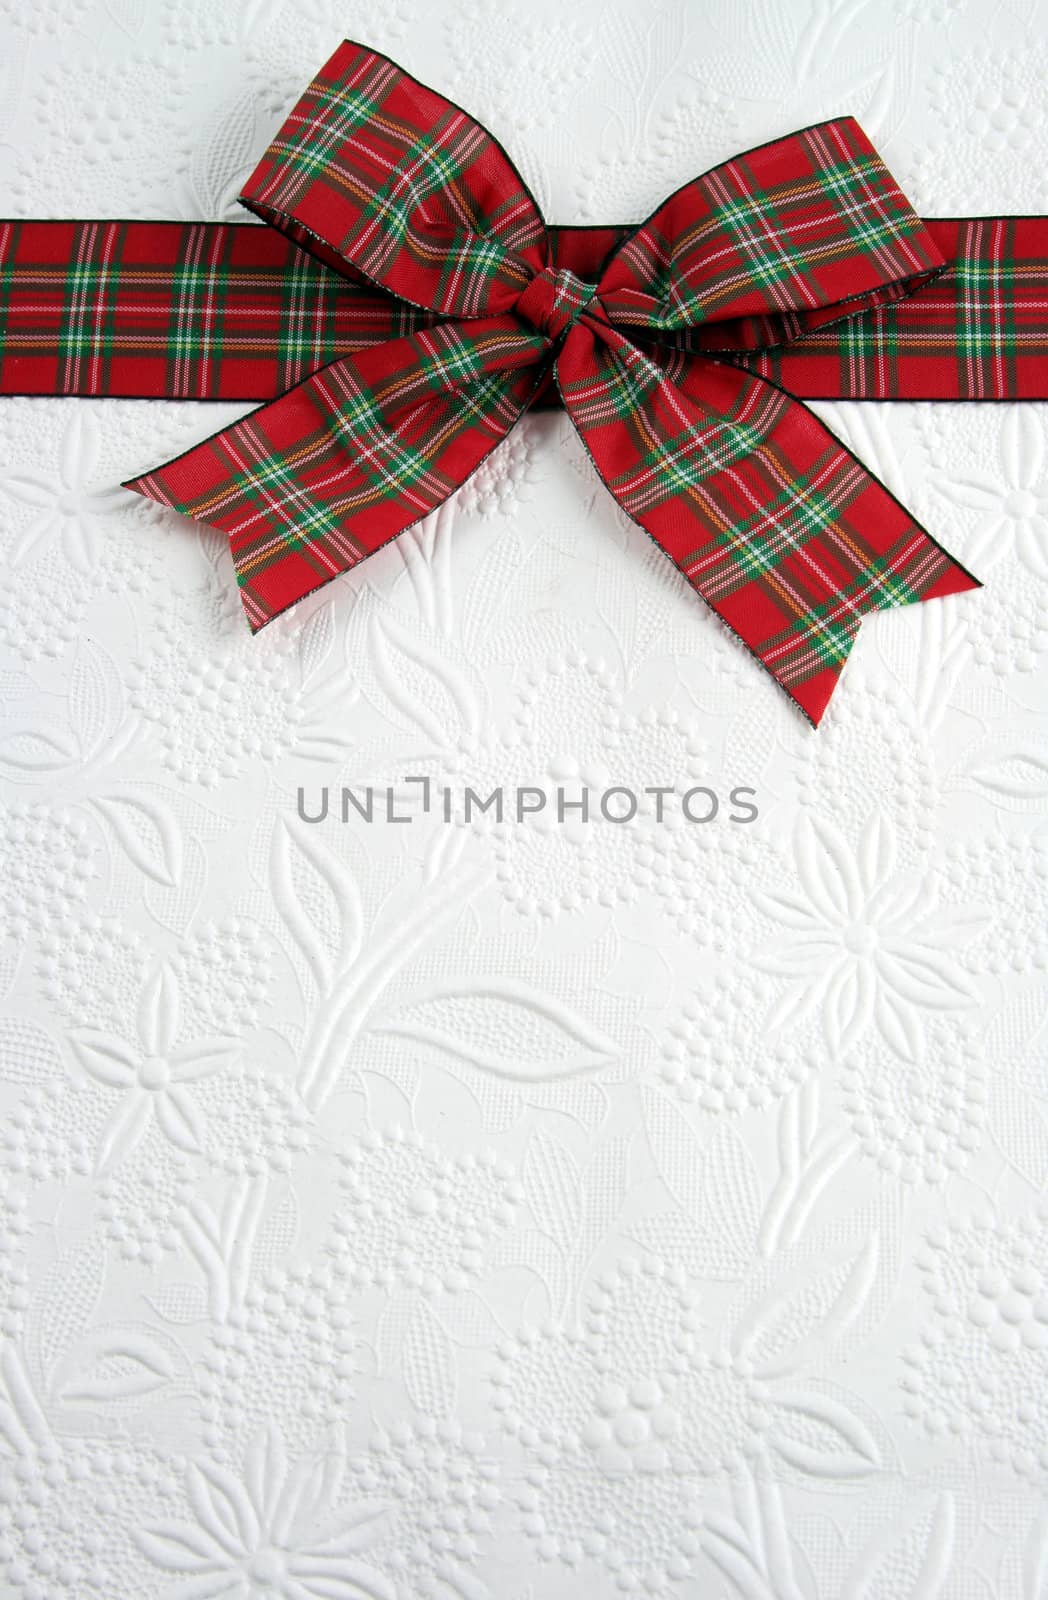 A plaid christmas bow on decorative white paper.
